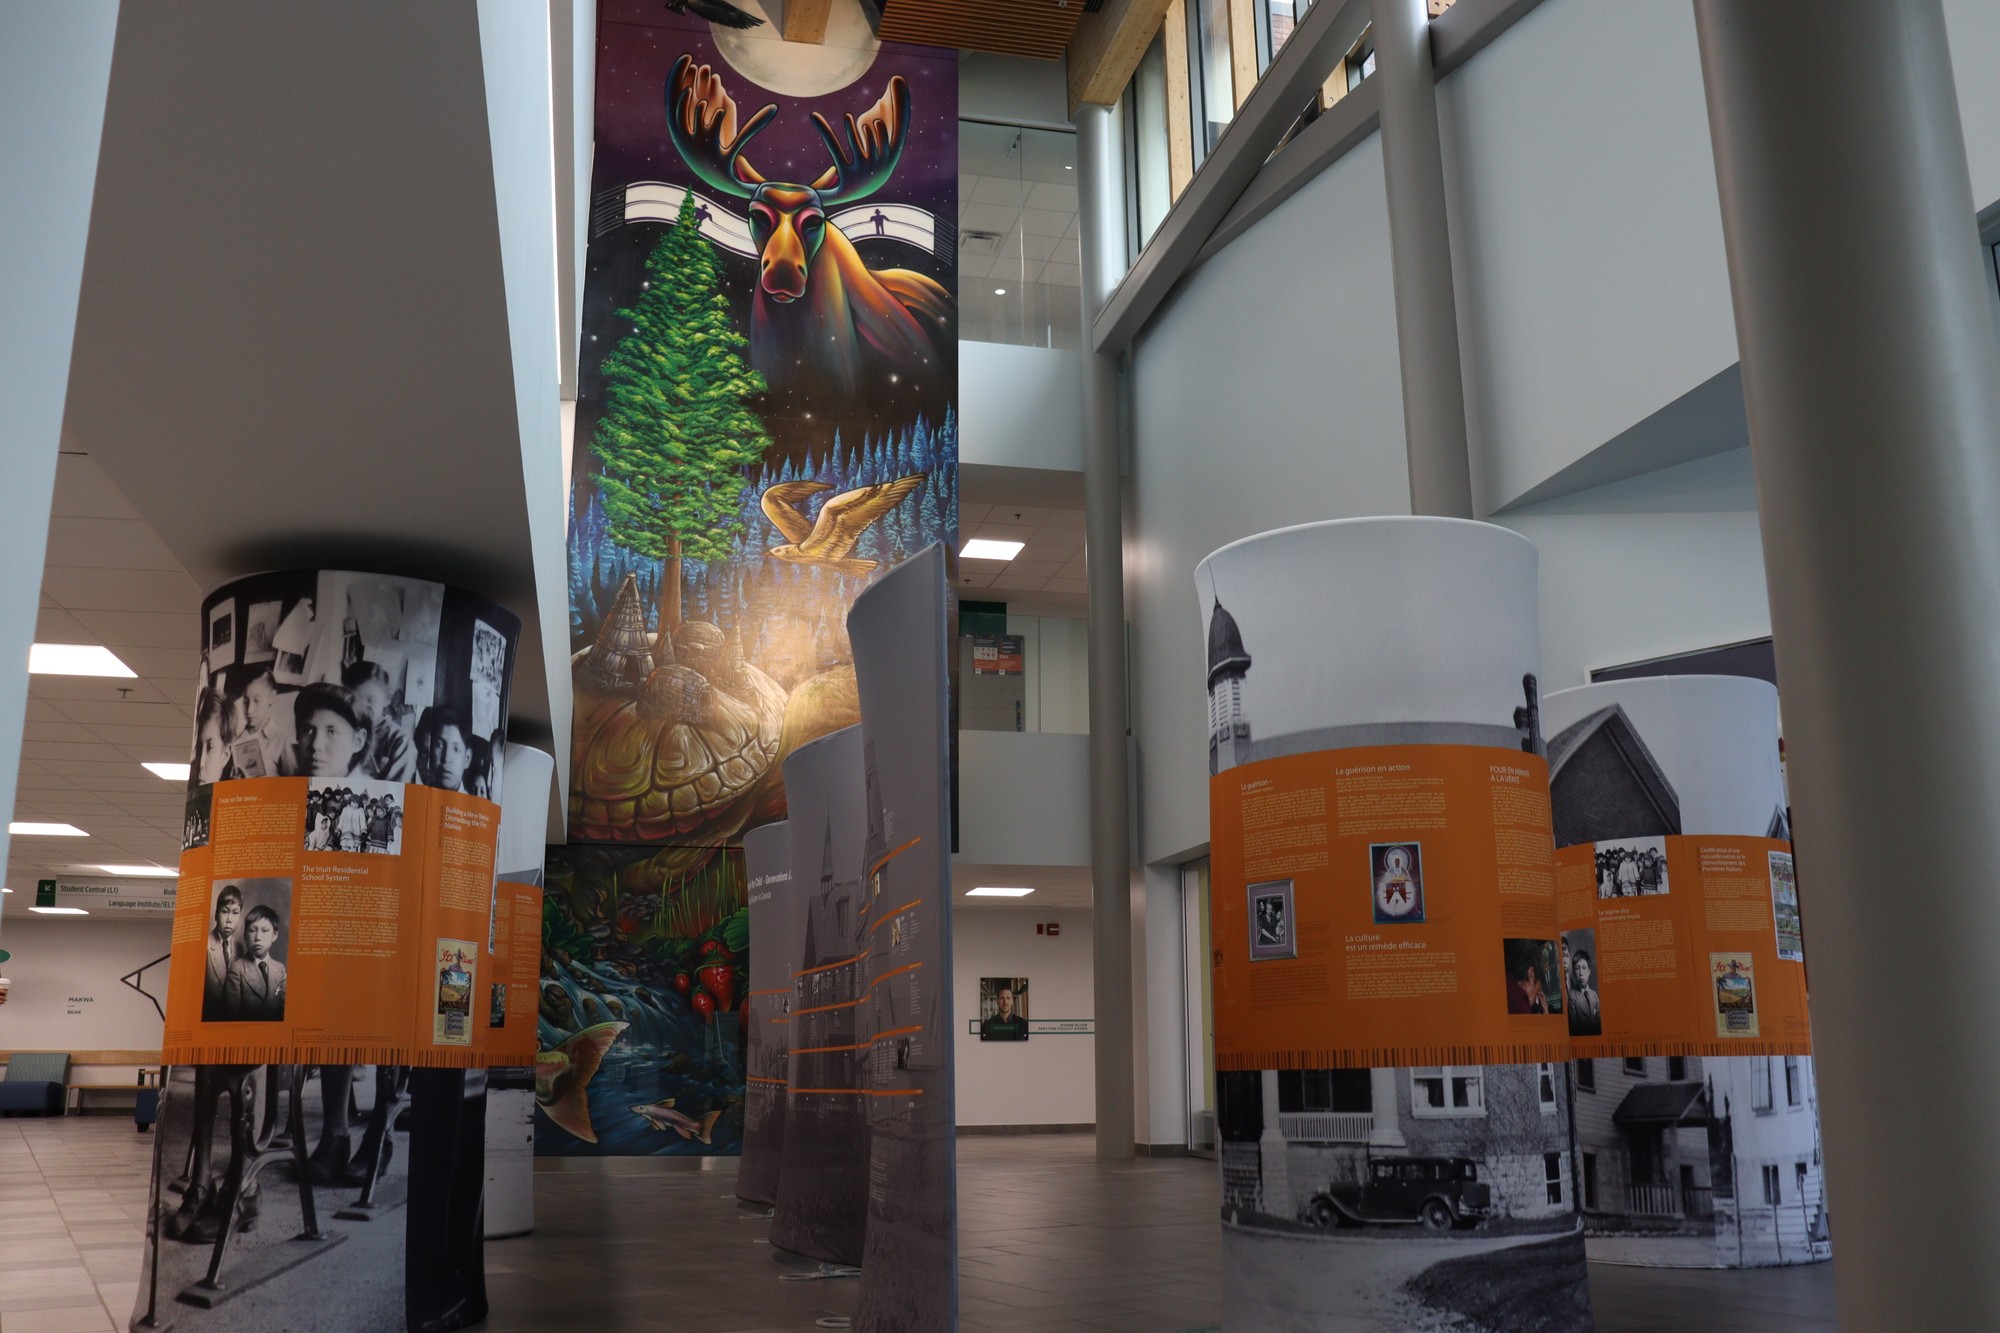 Displays are located in front of the Nawapon Indigenous Learning Commons, located in the C-building.